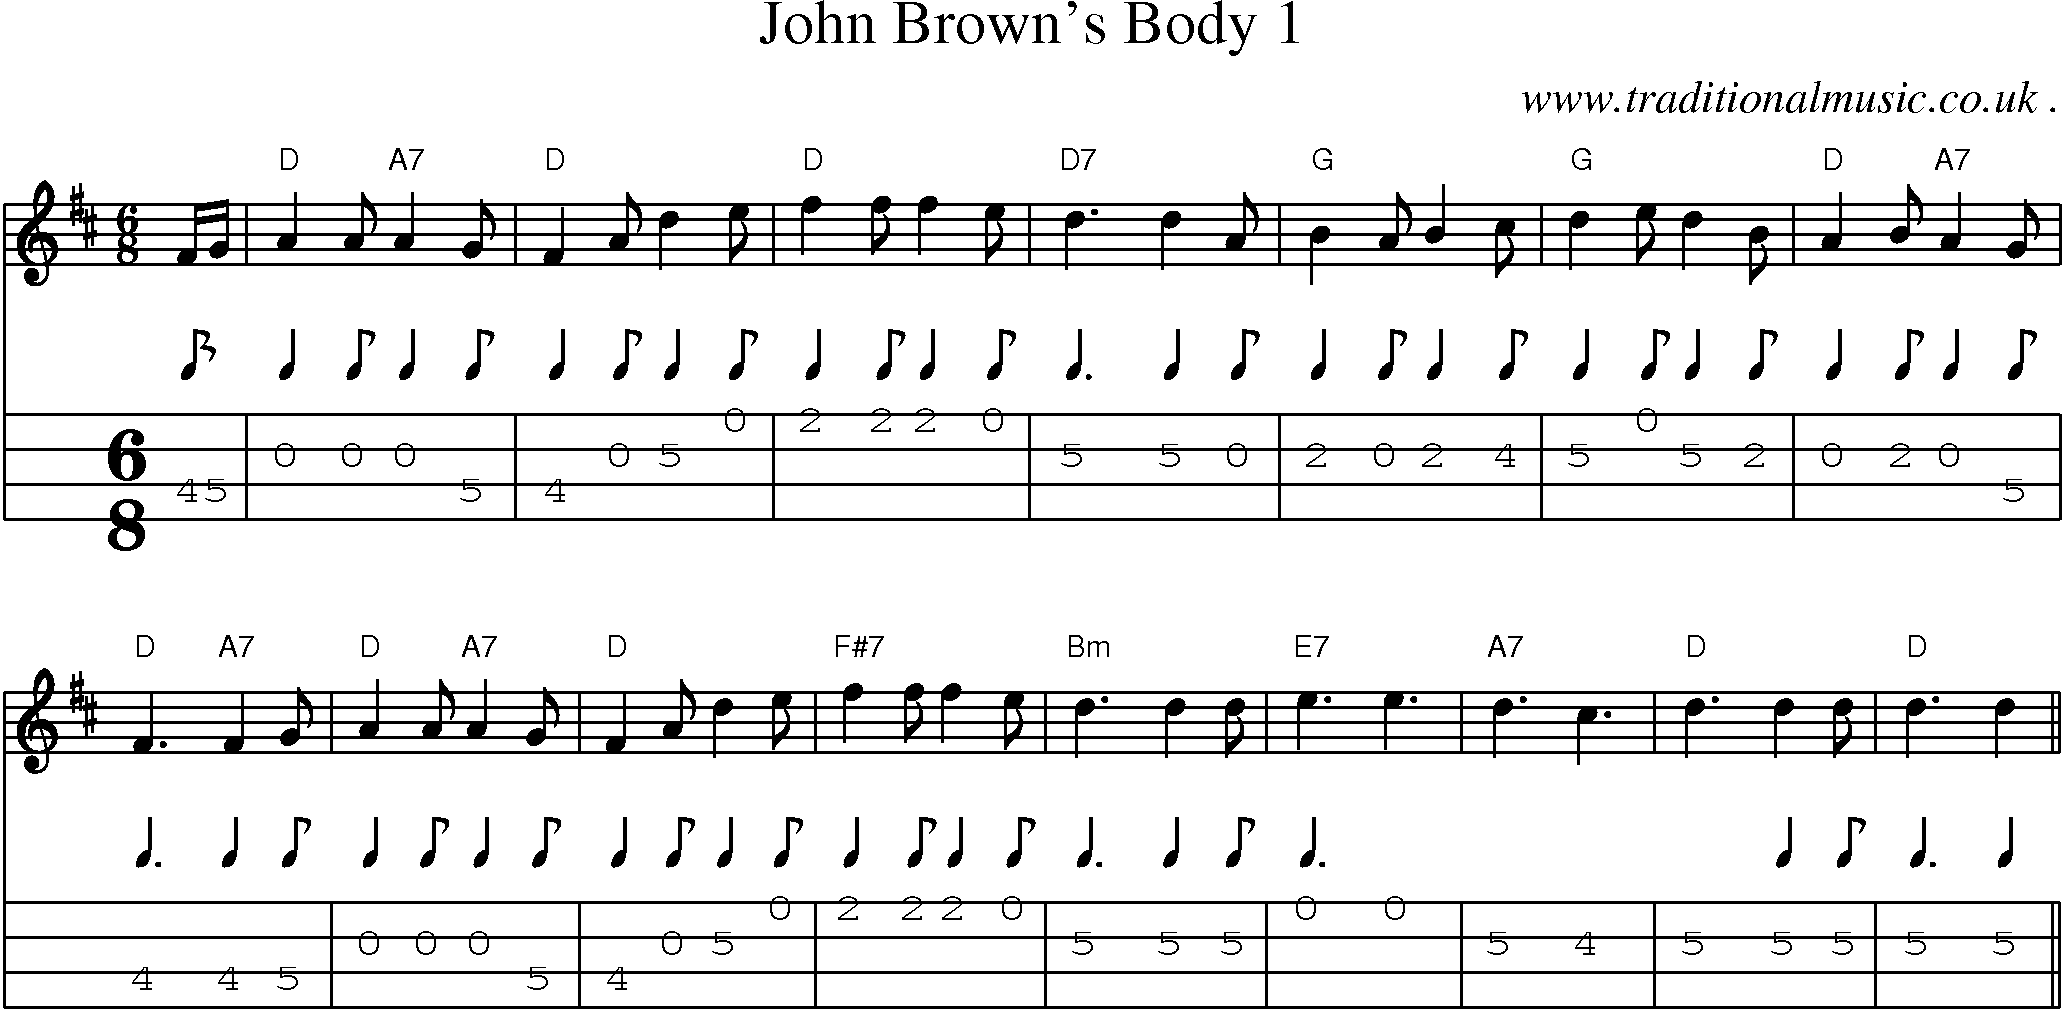 Music Score and Mandolin Tabs for John Browns Body 1